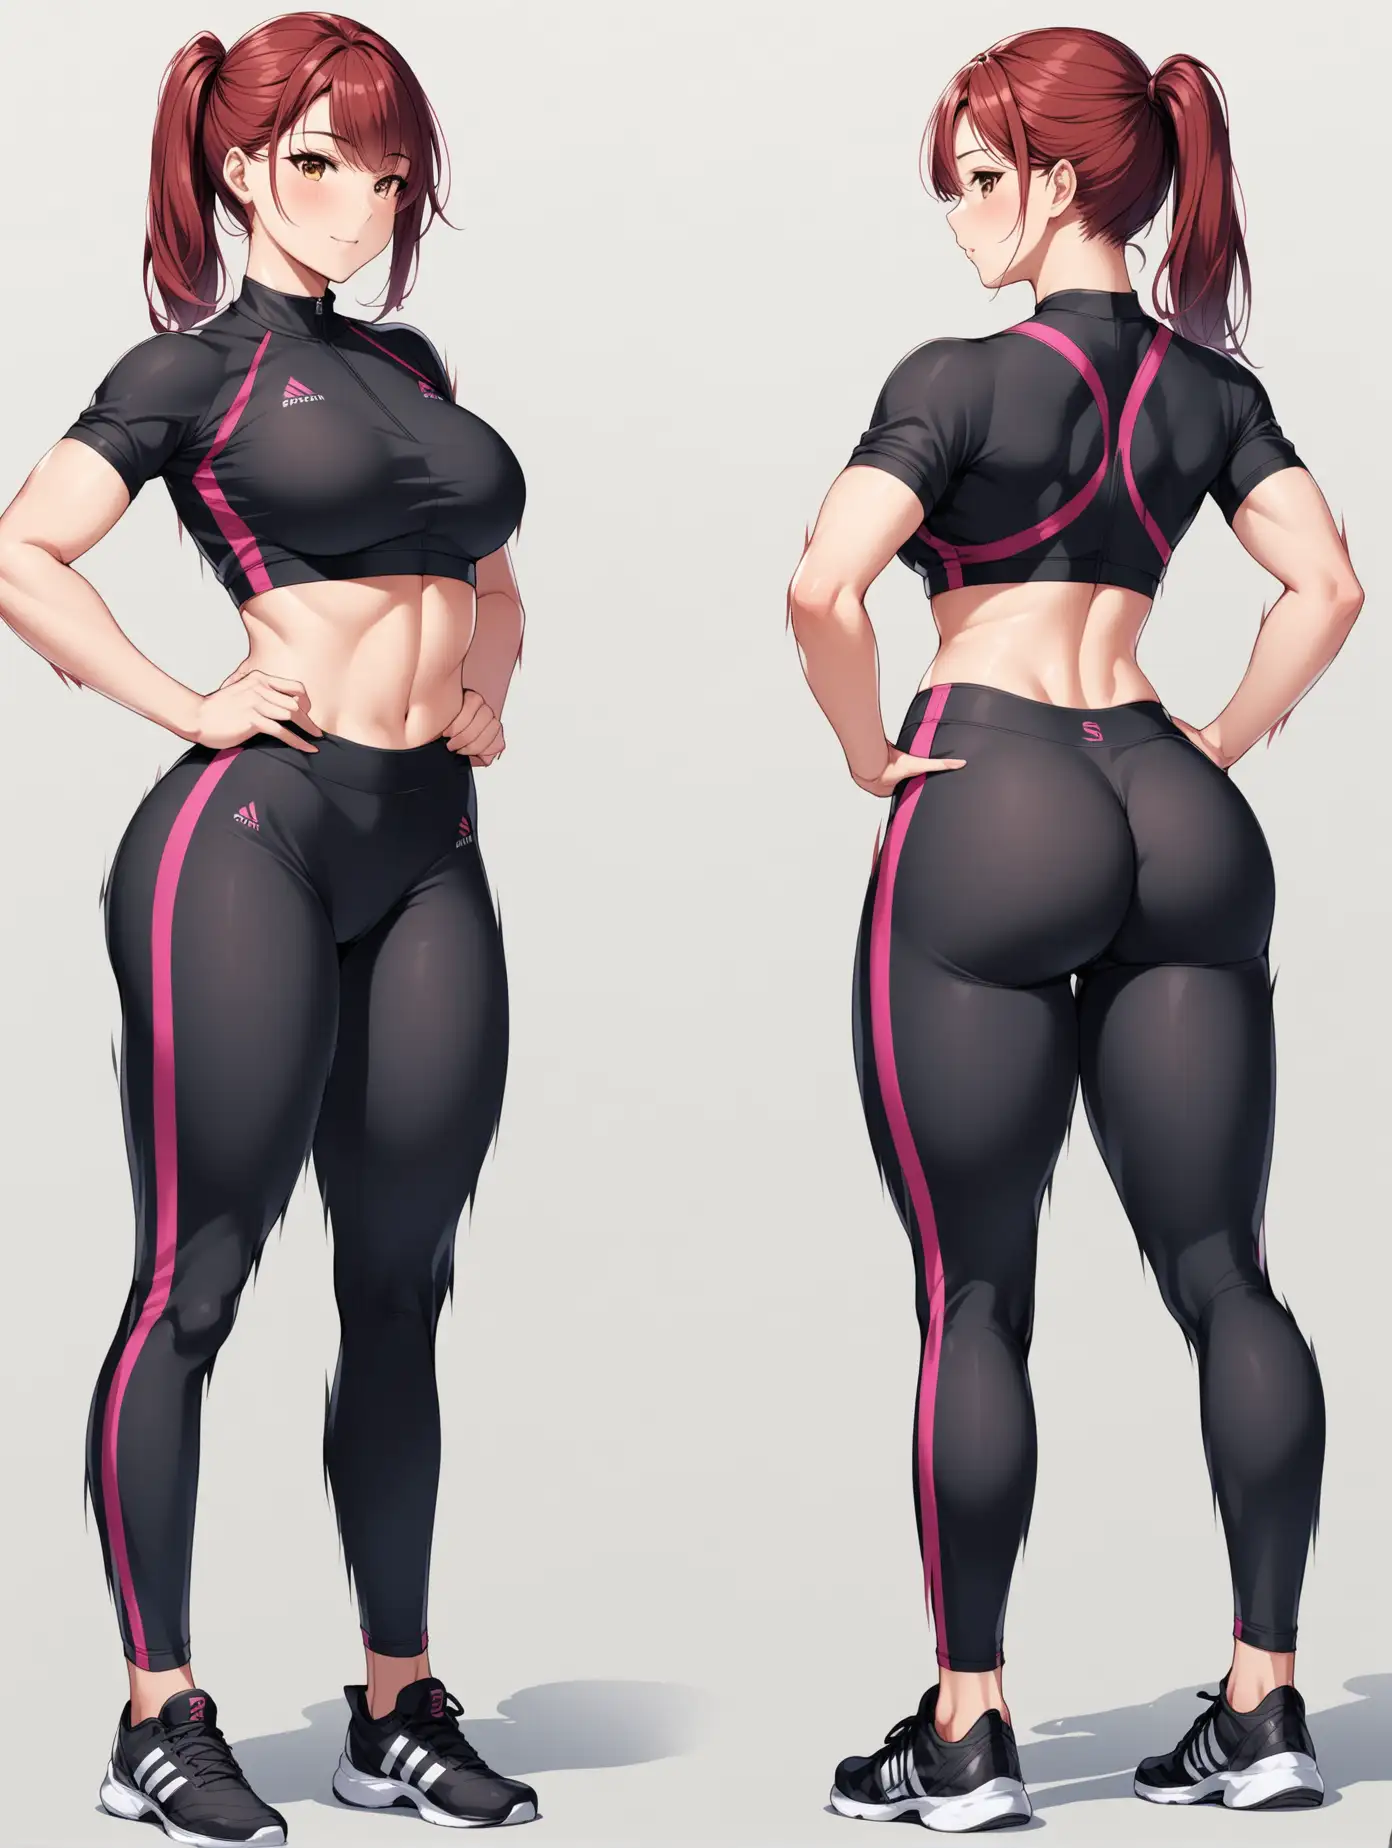 Picture full body 2 poses of a hot girl, training outfit, age 25, big ass